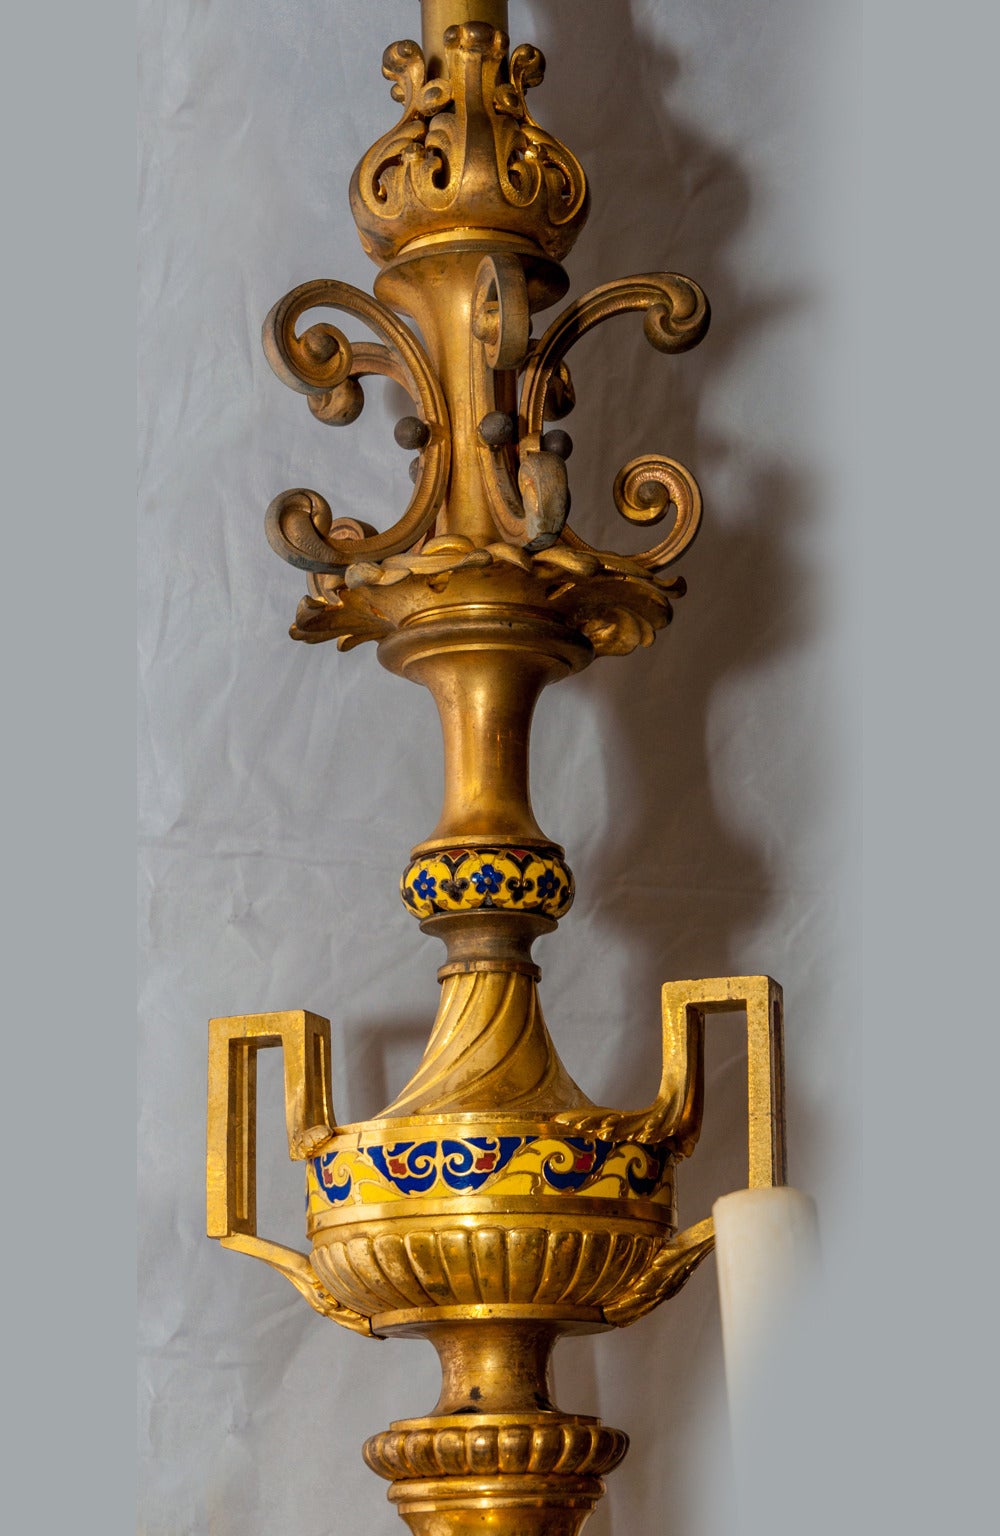 19th Century French Champleve Enamel and Bronze Nine-Light Chandelier For Sale 3